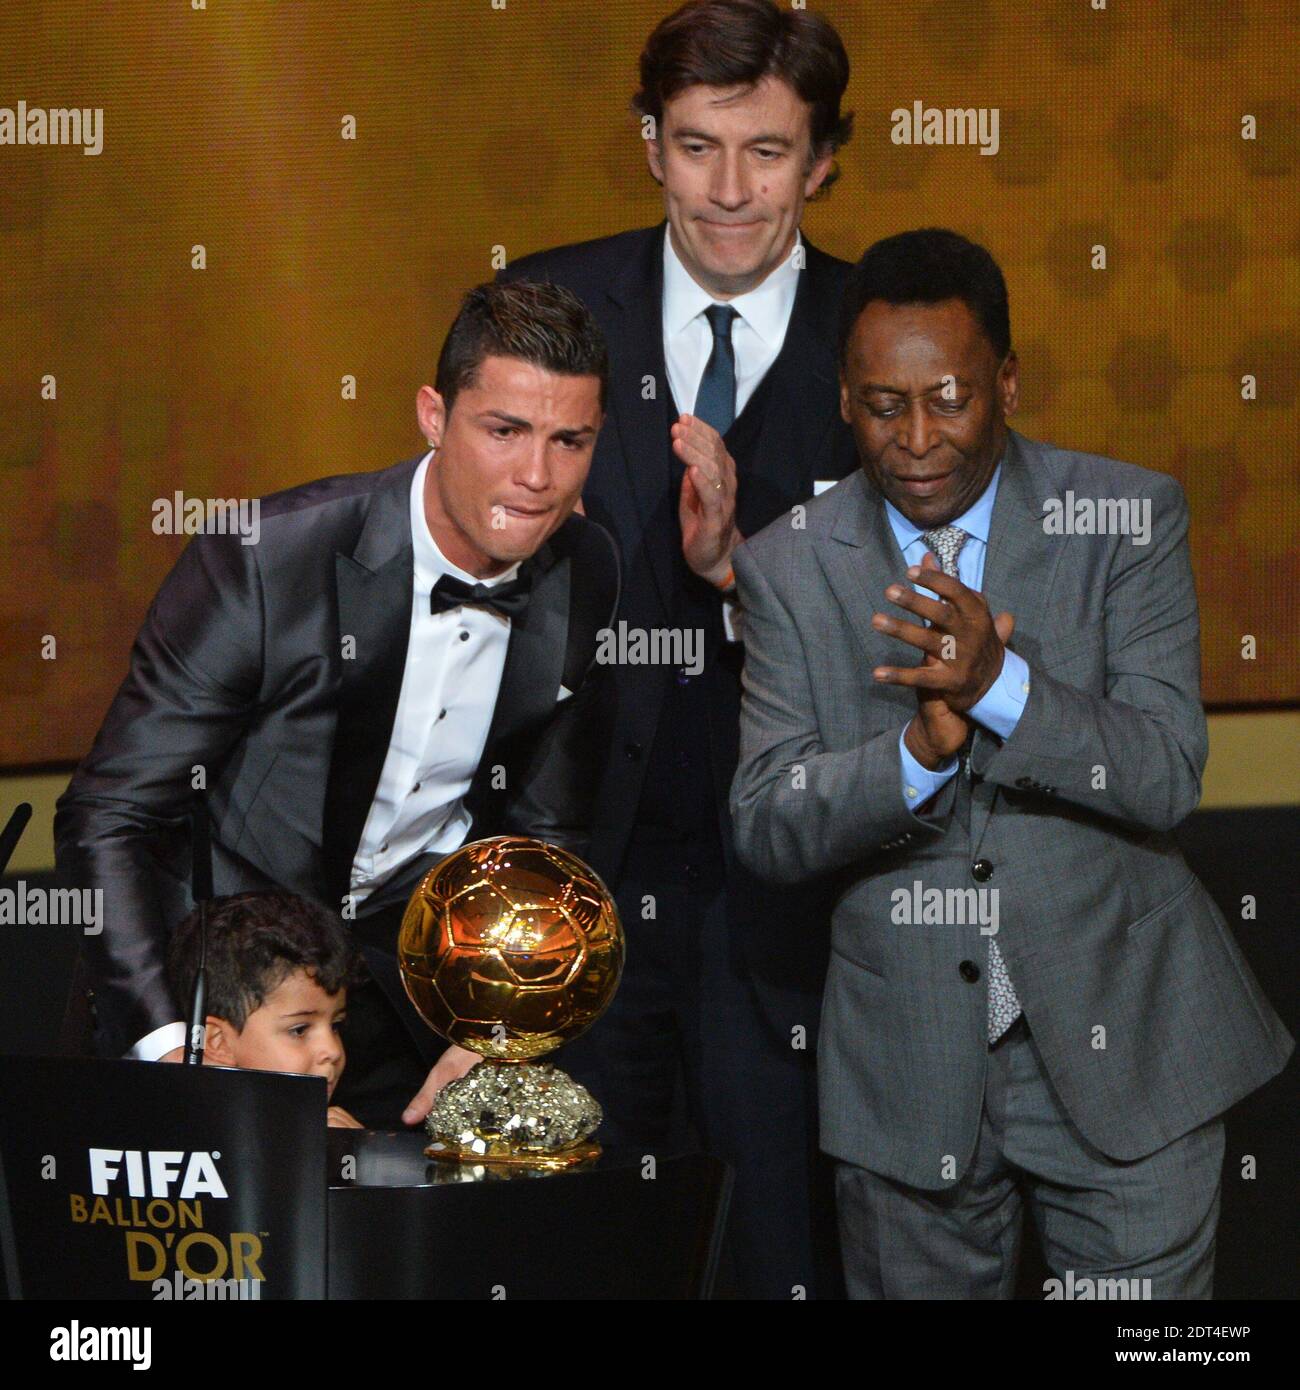 Portugal's Cristiano Ronaldo with son Cristiano Junior receiving the FIFA  Ballon d'Or award from Sepp Blatter, Francois Moriniere and Peleduring FIFA  Ballon d'Or 2013 trophy at the Kongresshalle in Zurich, Switzerland on